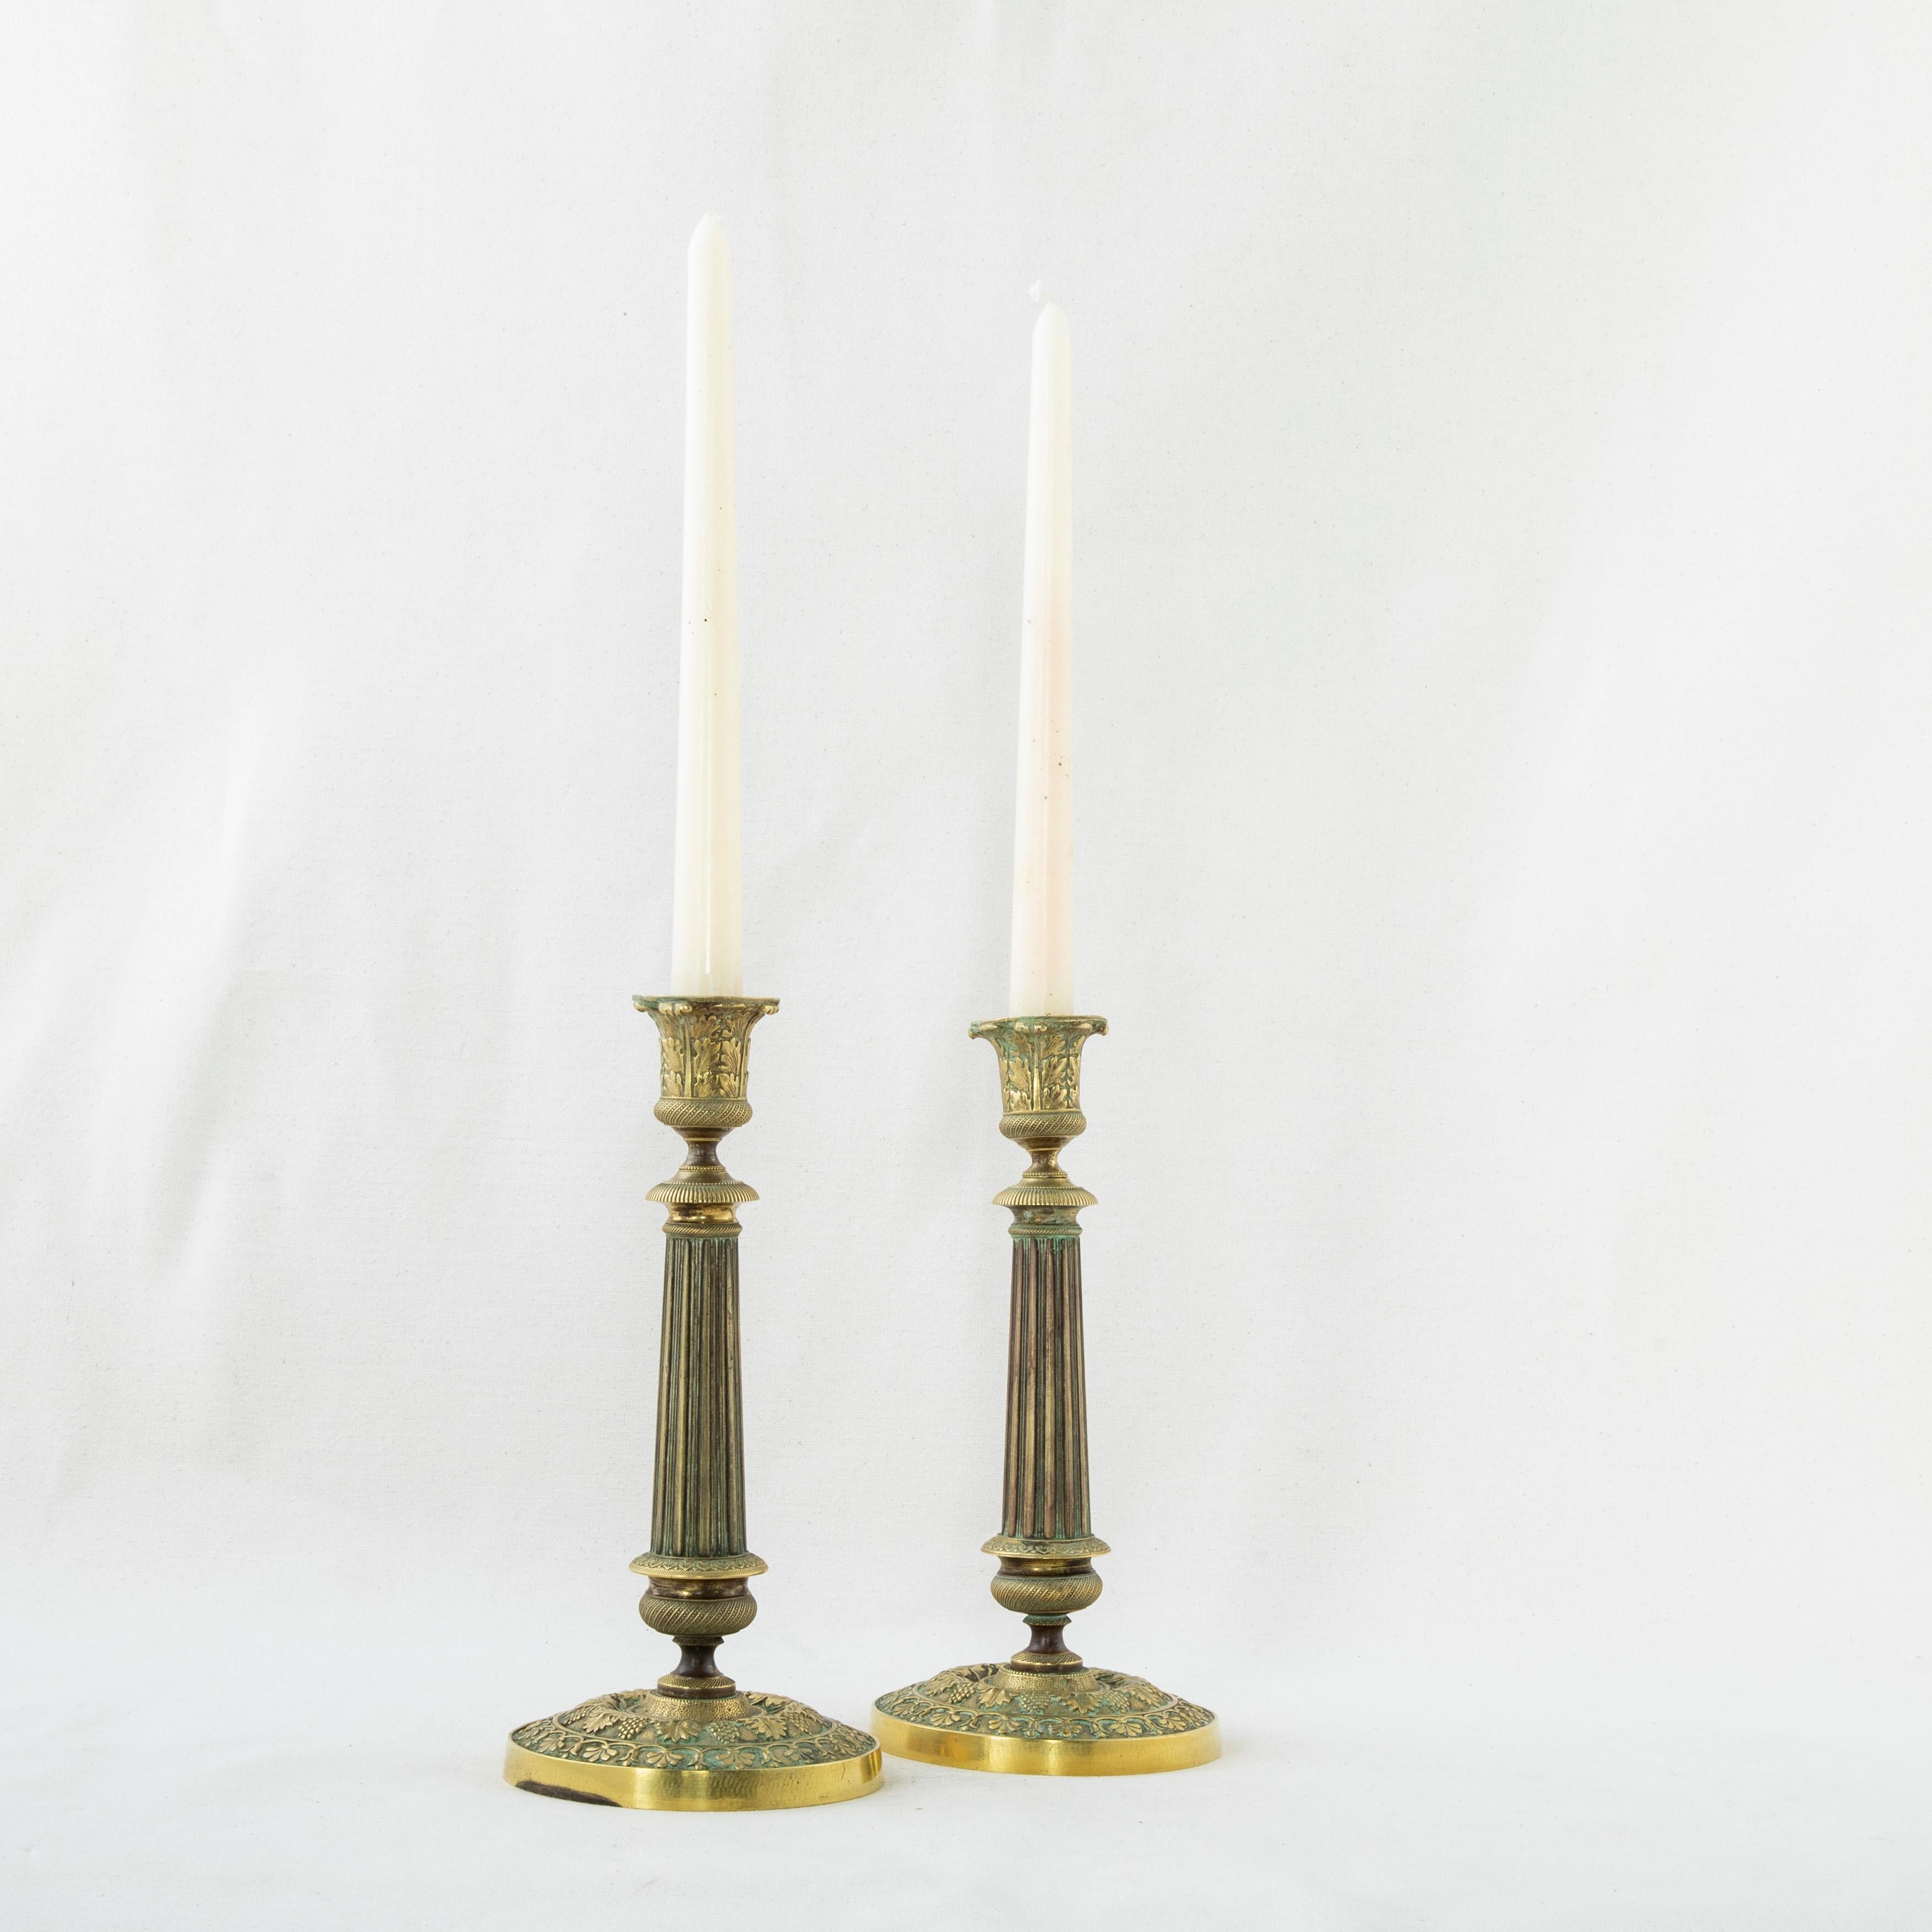 Pair of Late 19th Century French Bronze Candlesticks with Grapes, Grape Leaves For Sale 2